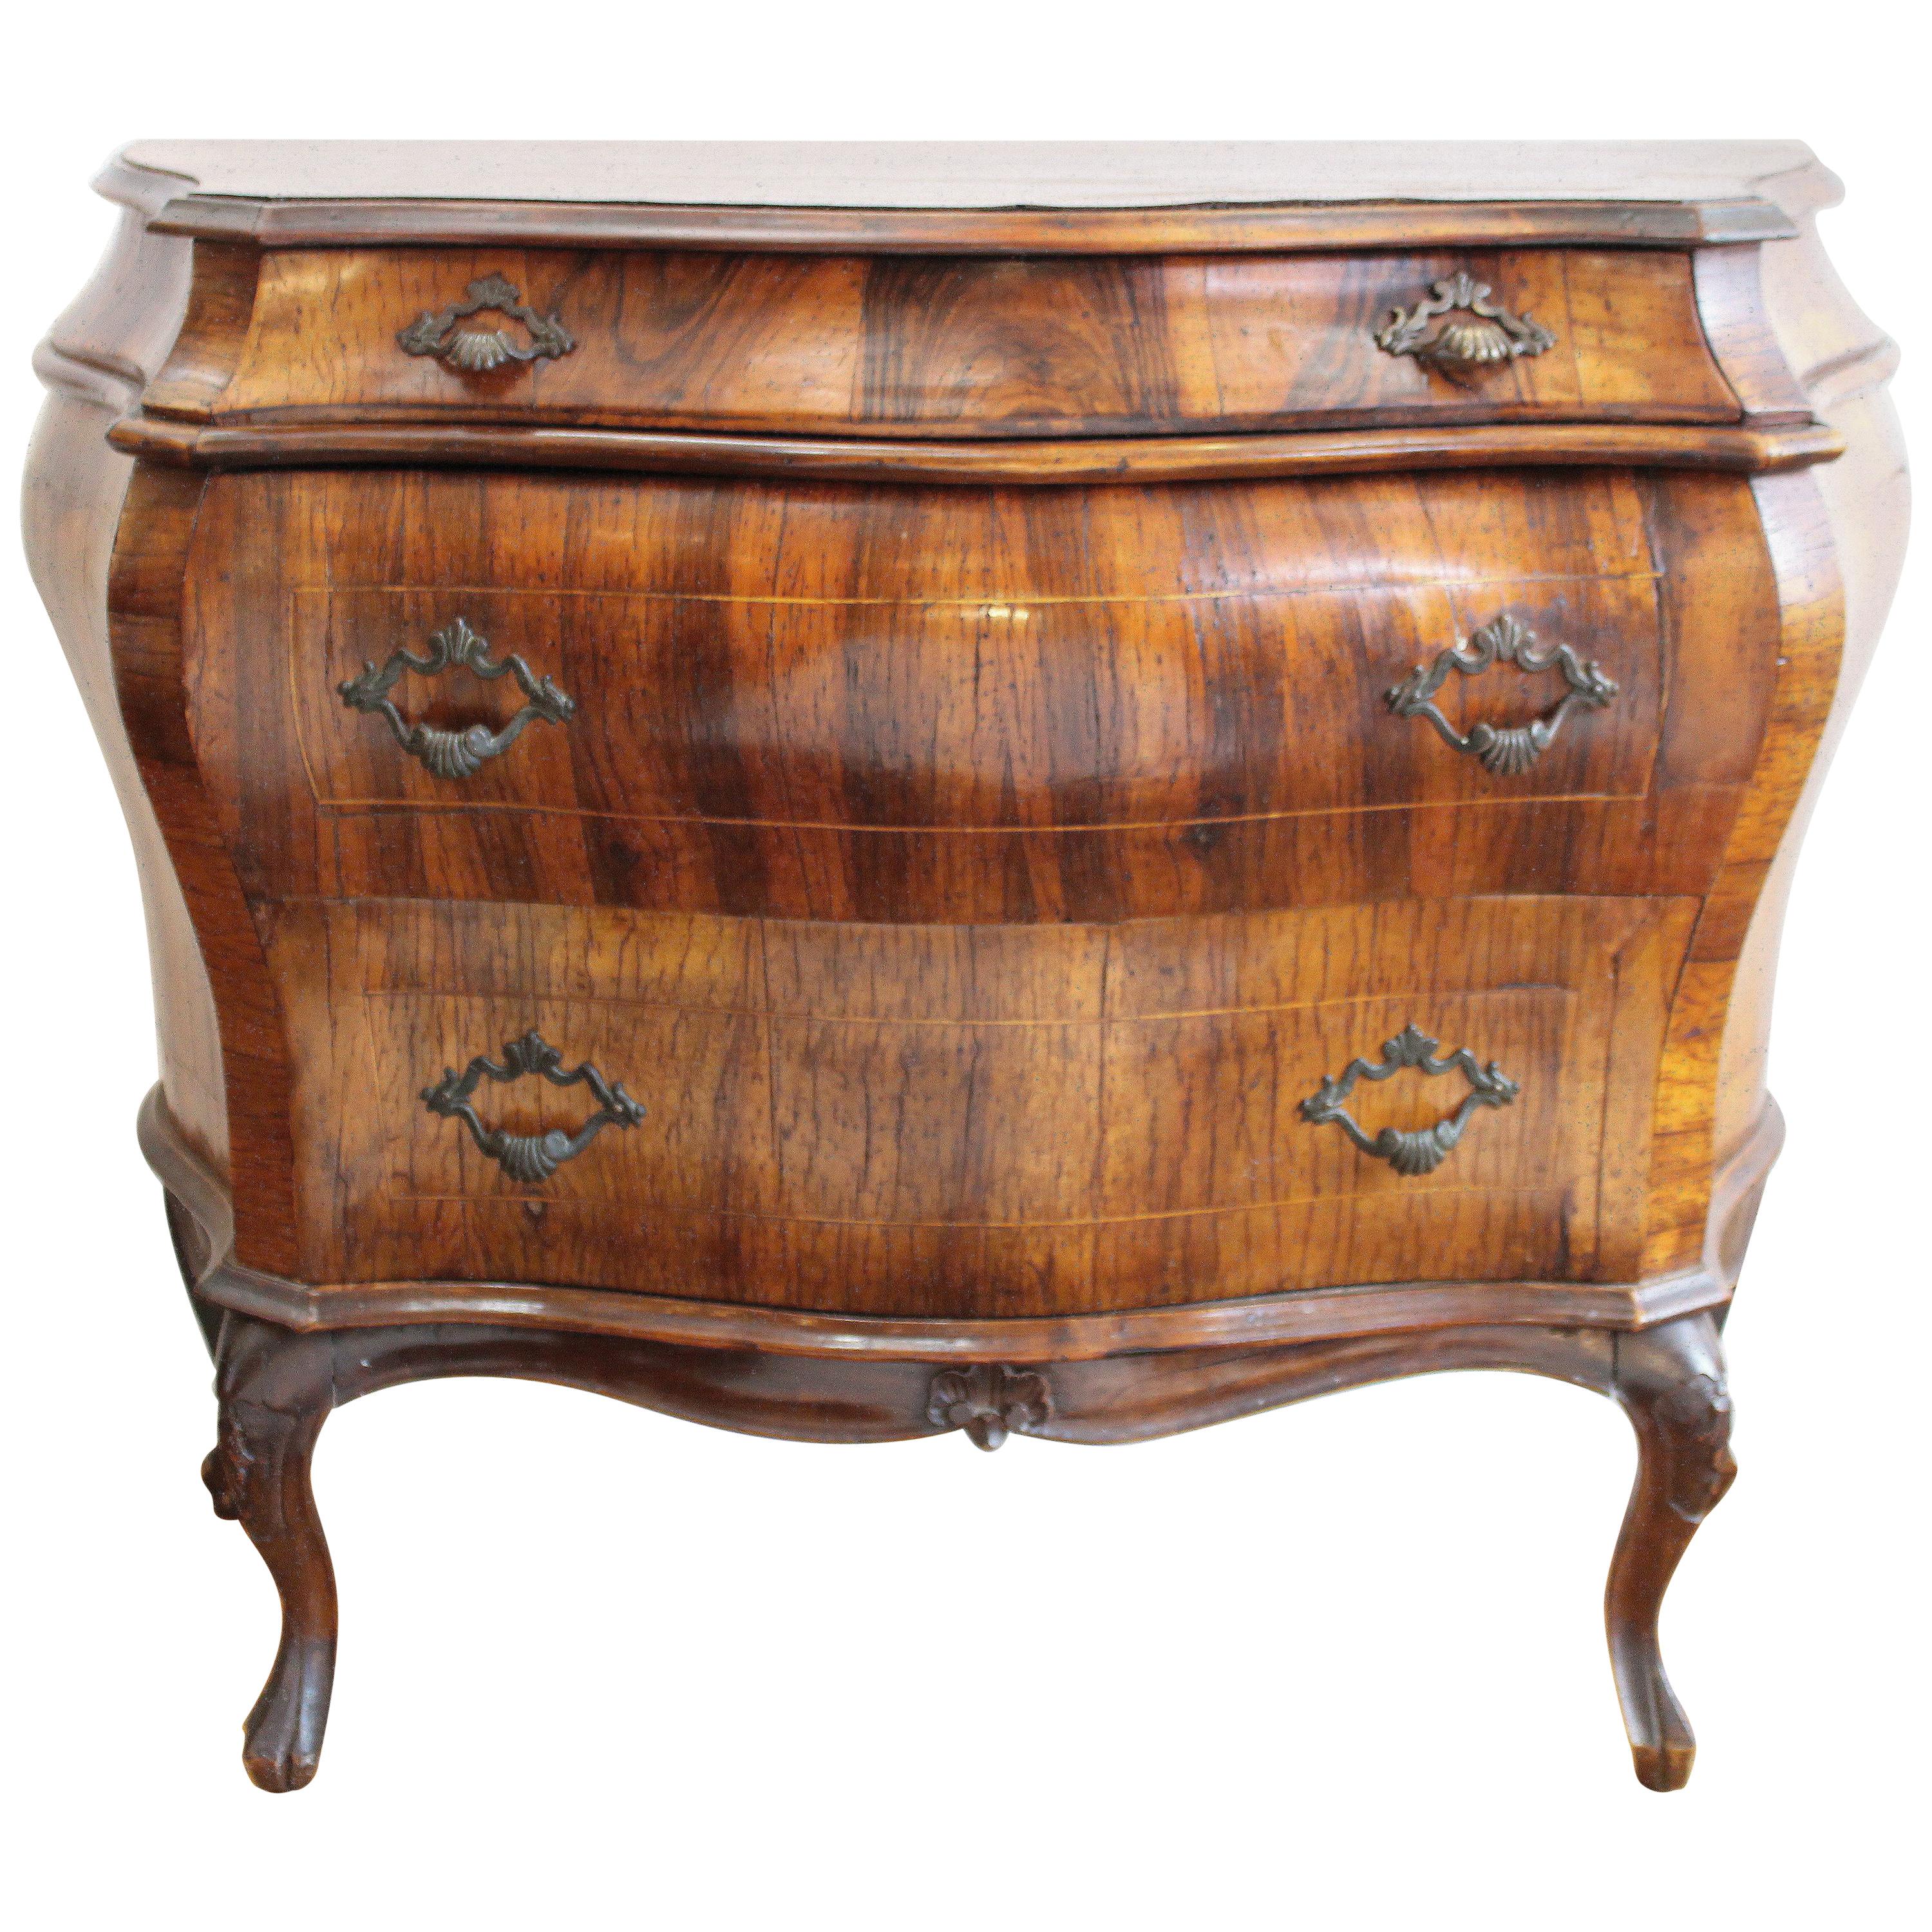 Northern Italian Rococo Manner Bombe Commode in Fruitwood